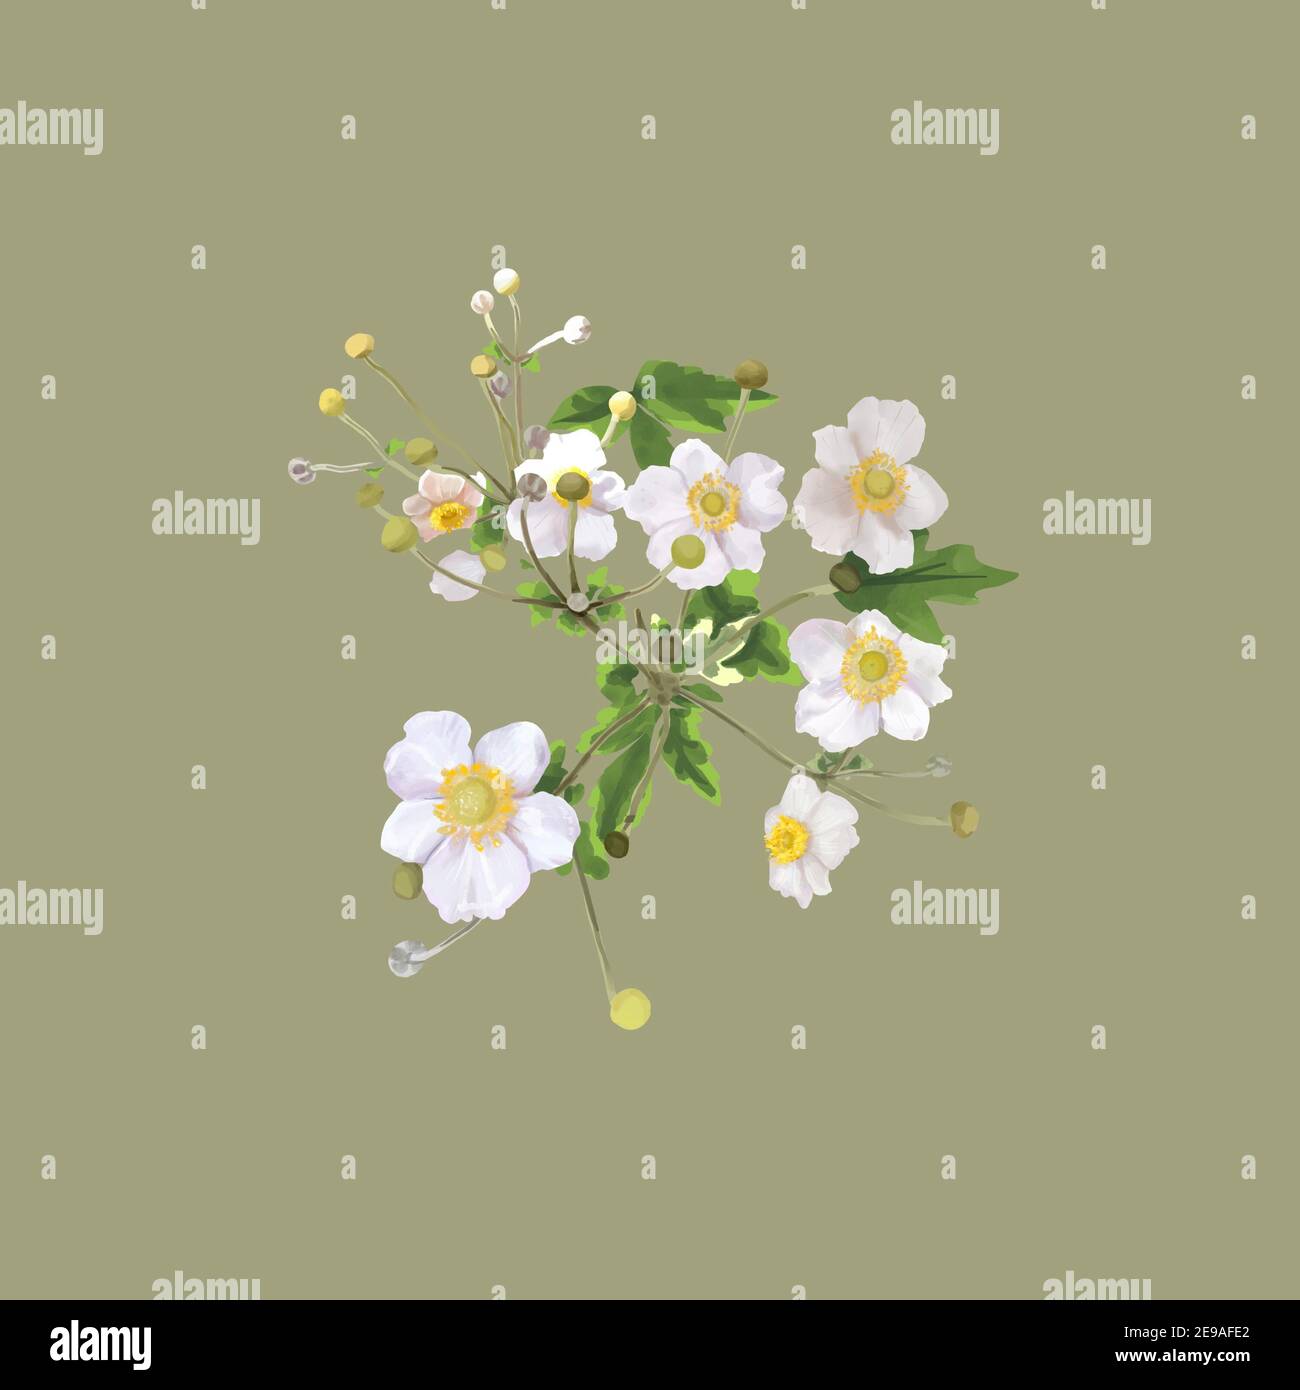 white flowers with a yellow center. bush of white flowers. watercolor  Stock Photo